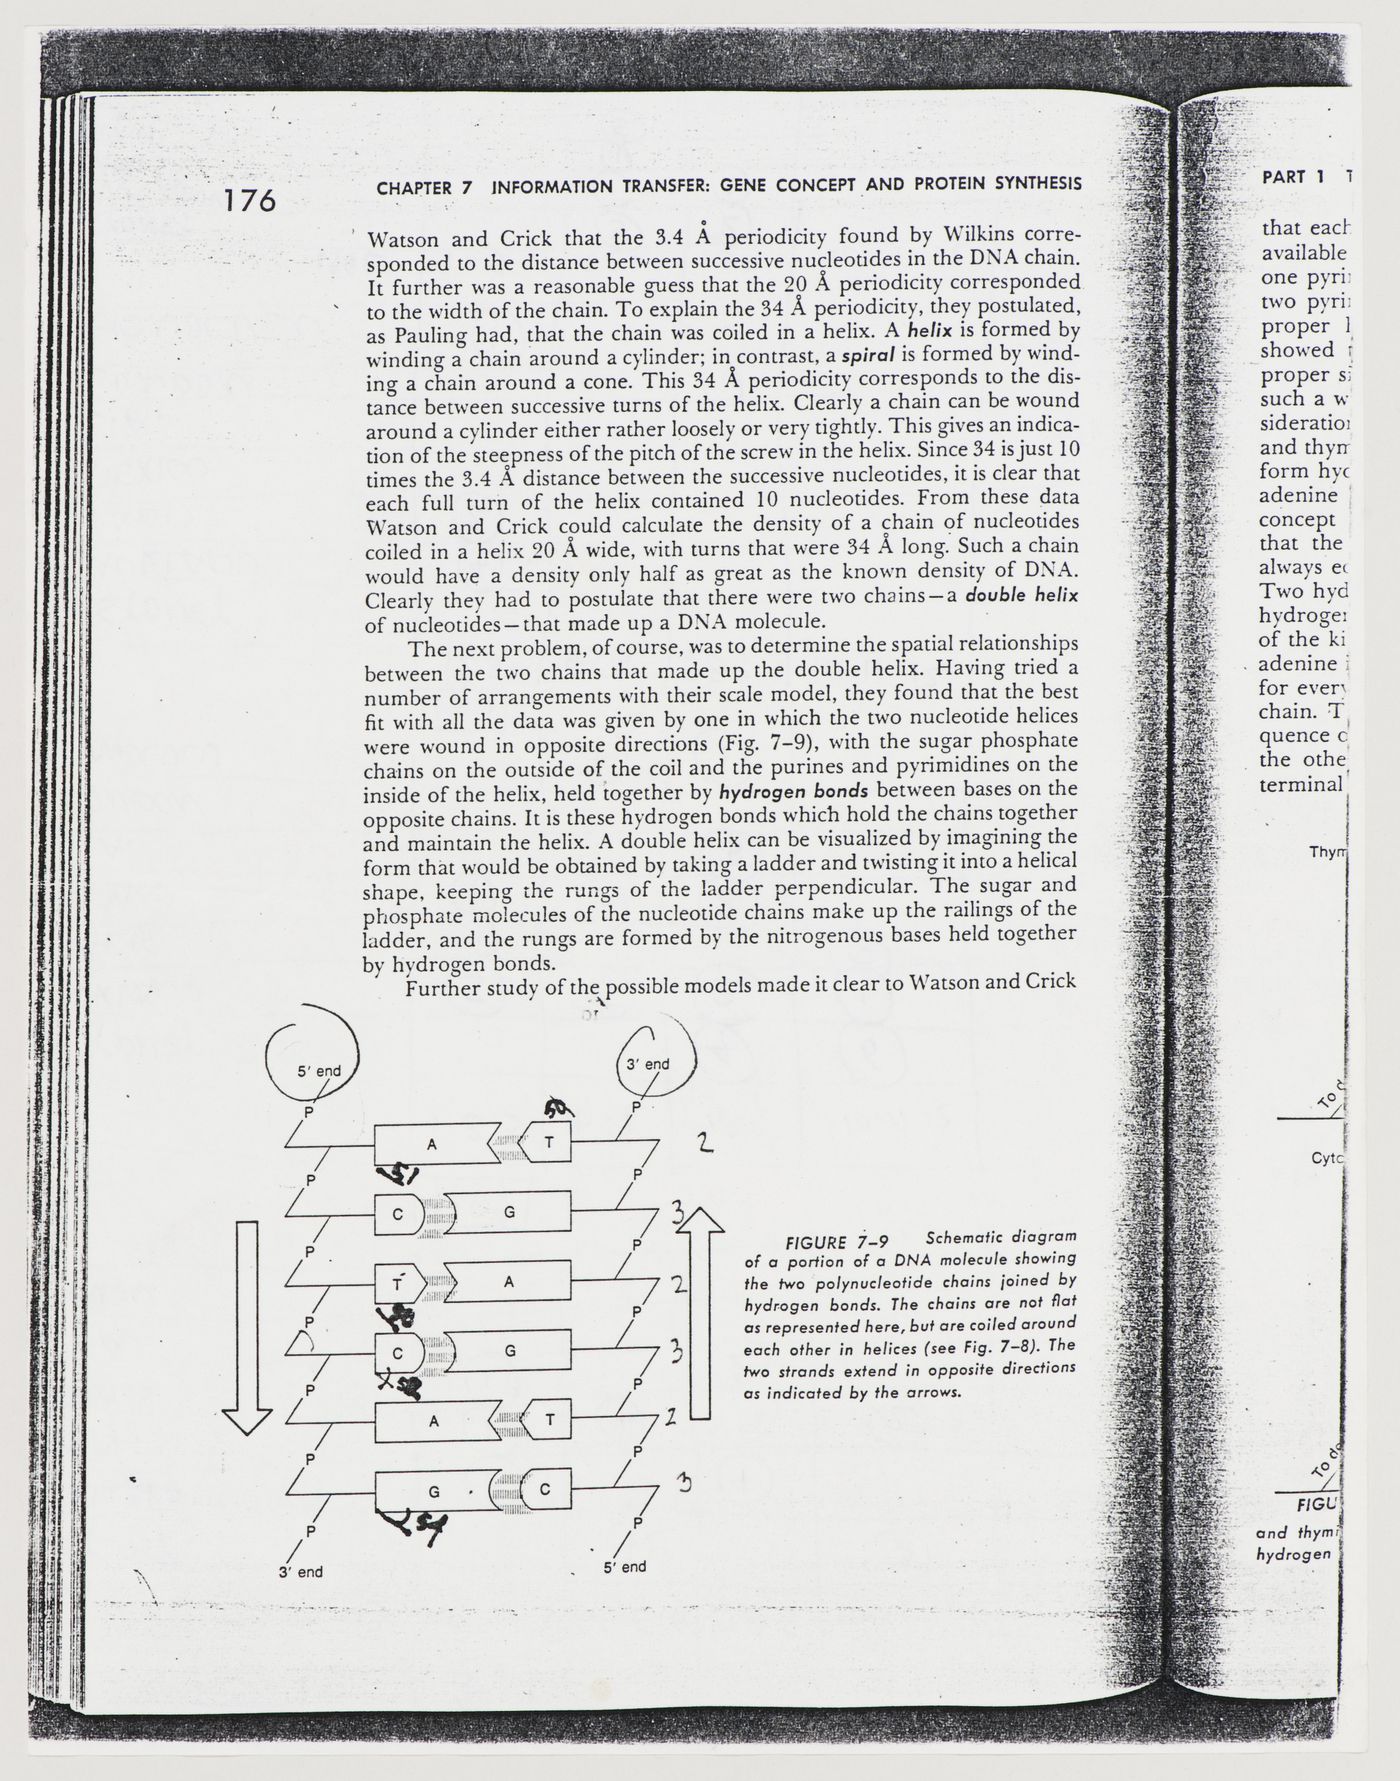 Copy of a book page with partial description and schematic diagram of a portion of a DNA molecule, documentation for Biocentrum - Biology Center for the J.W. Goethe University, Frankfurt am Main, Germany